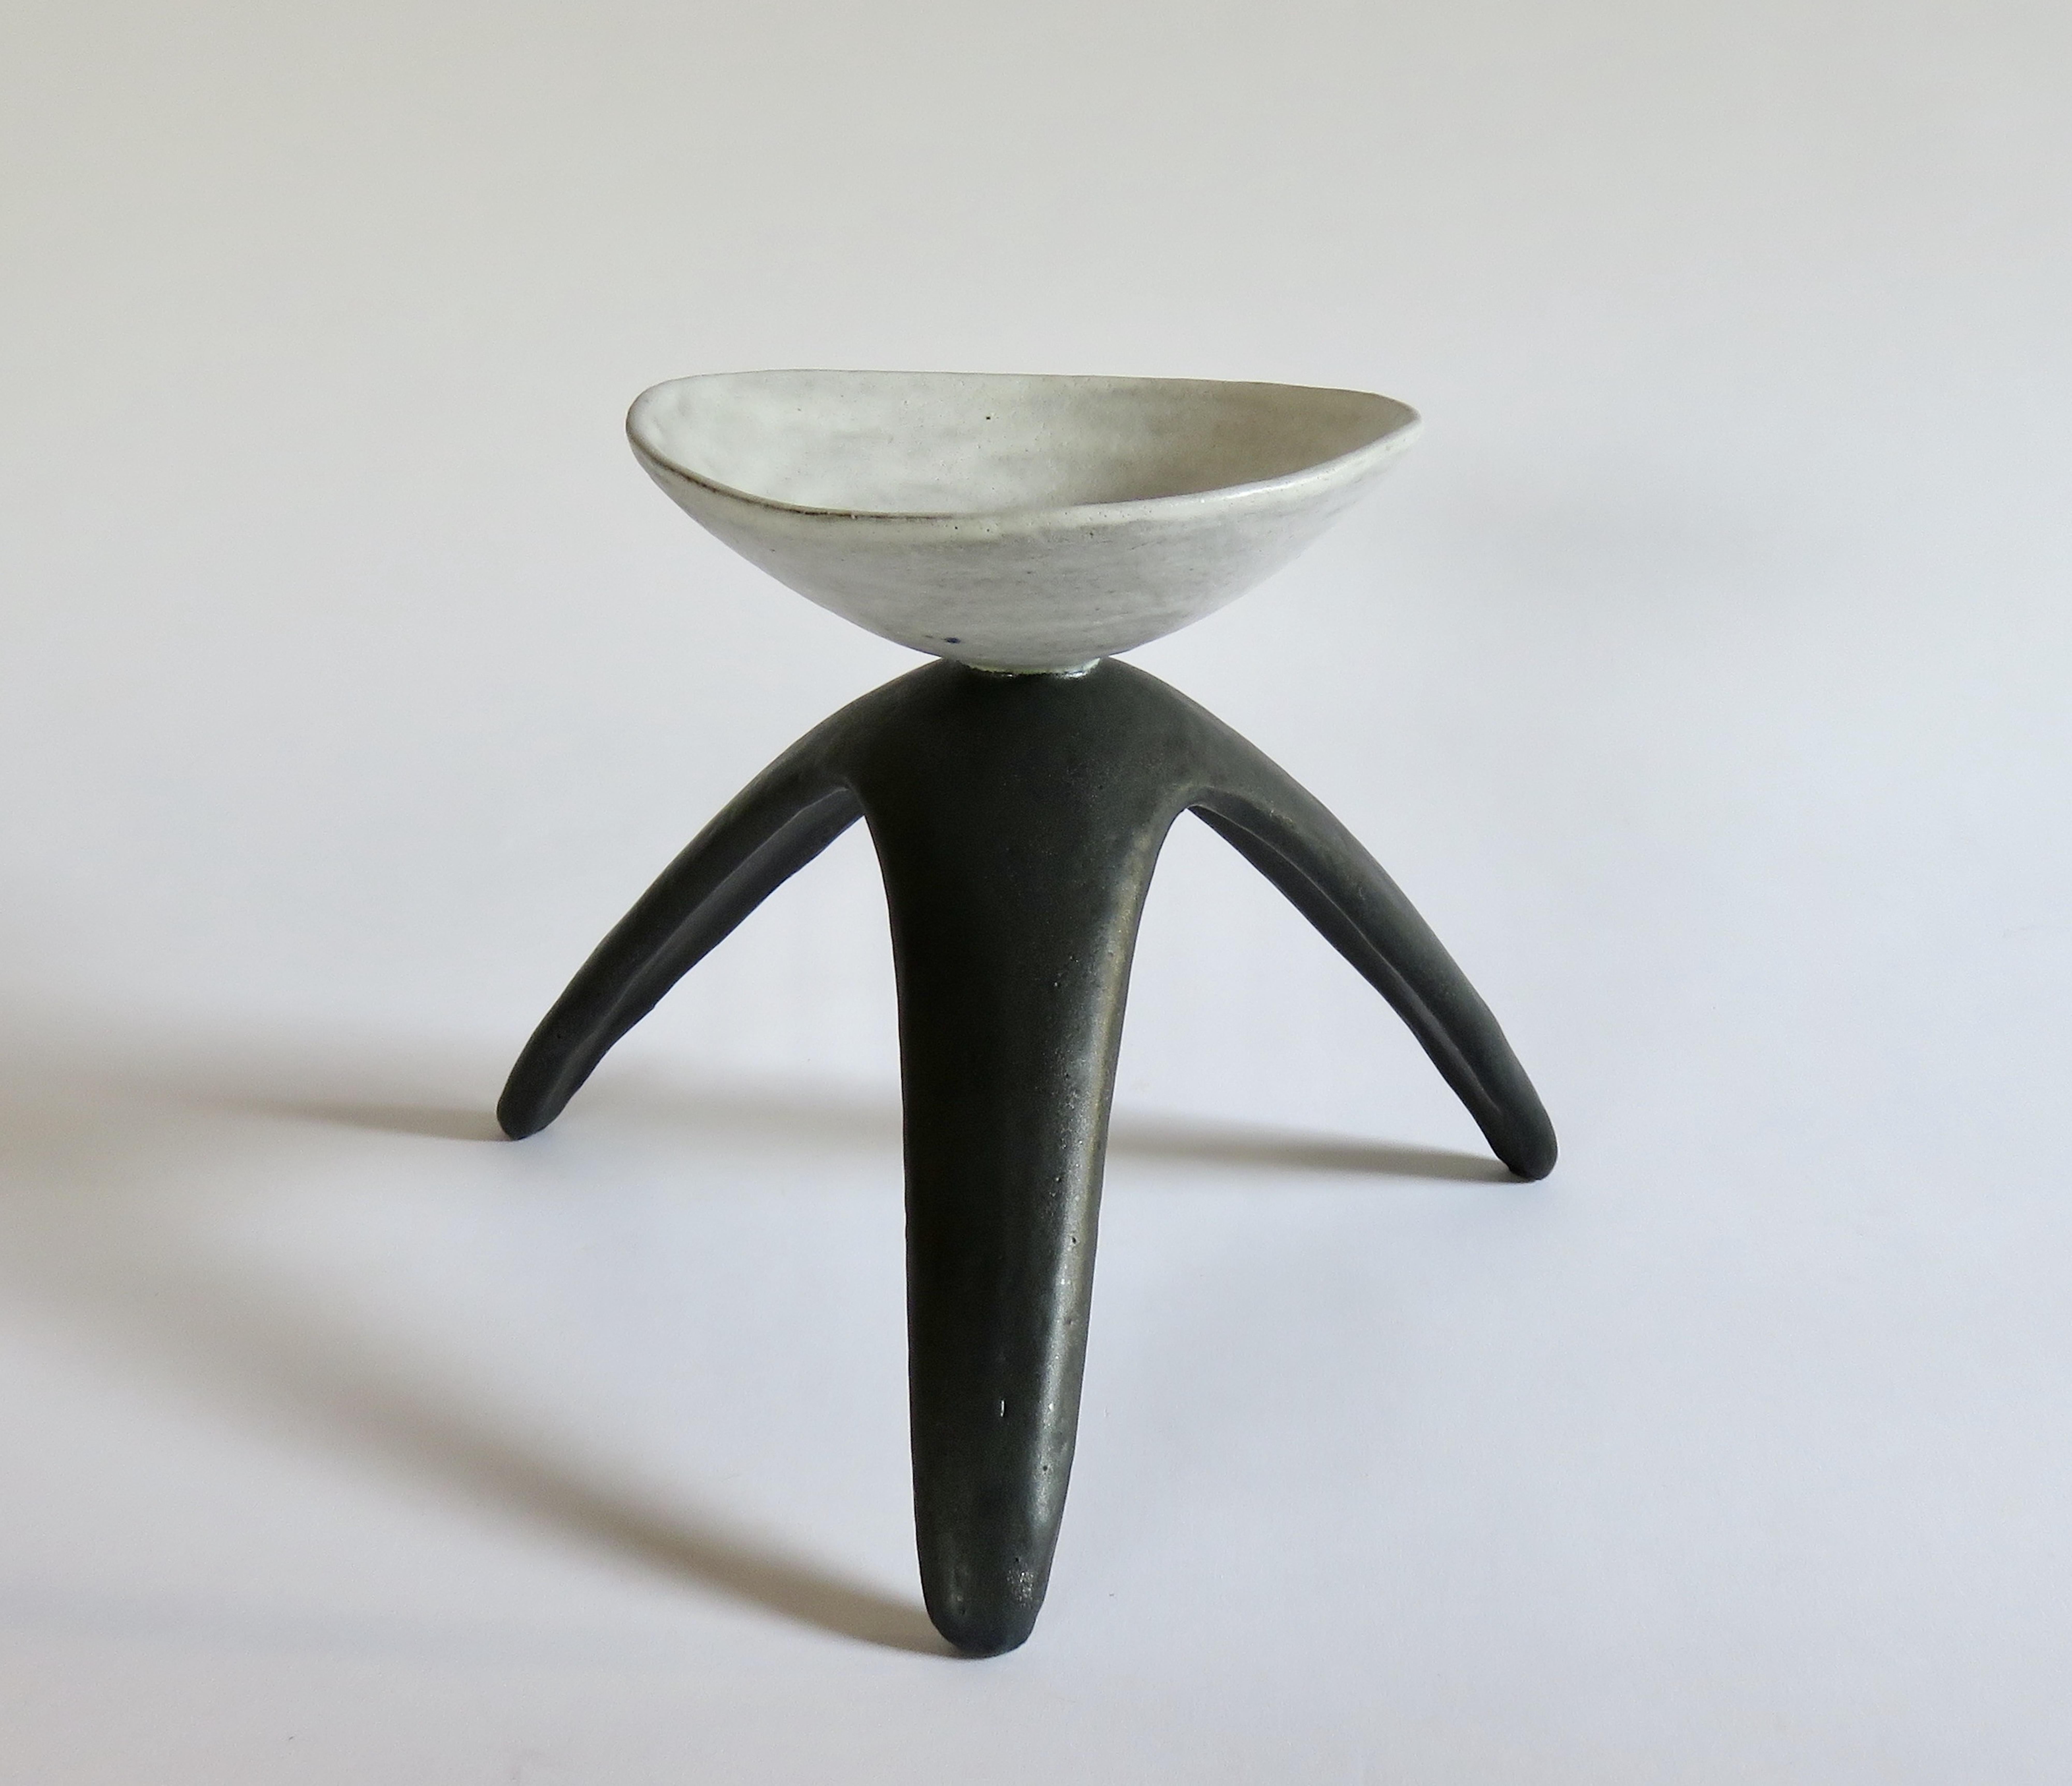 Contemporary White Chalice Cup on Black Tripod Legs, Glazed Hand Built Ceramic Sculpture